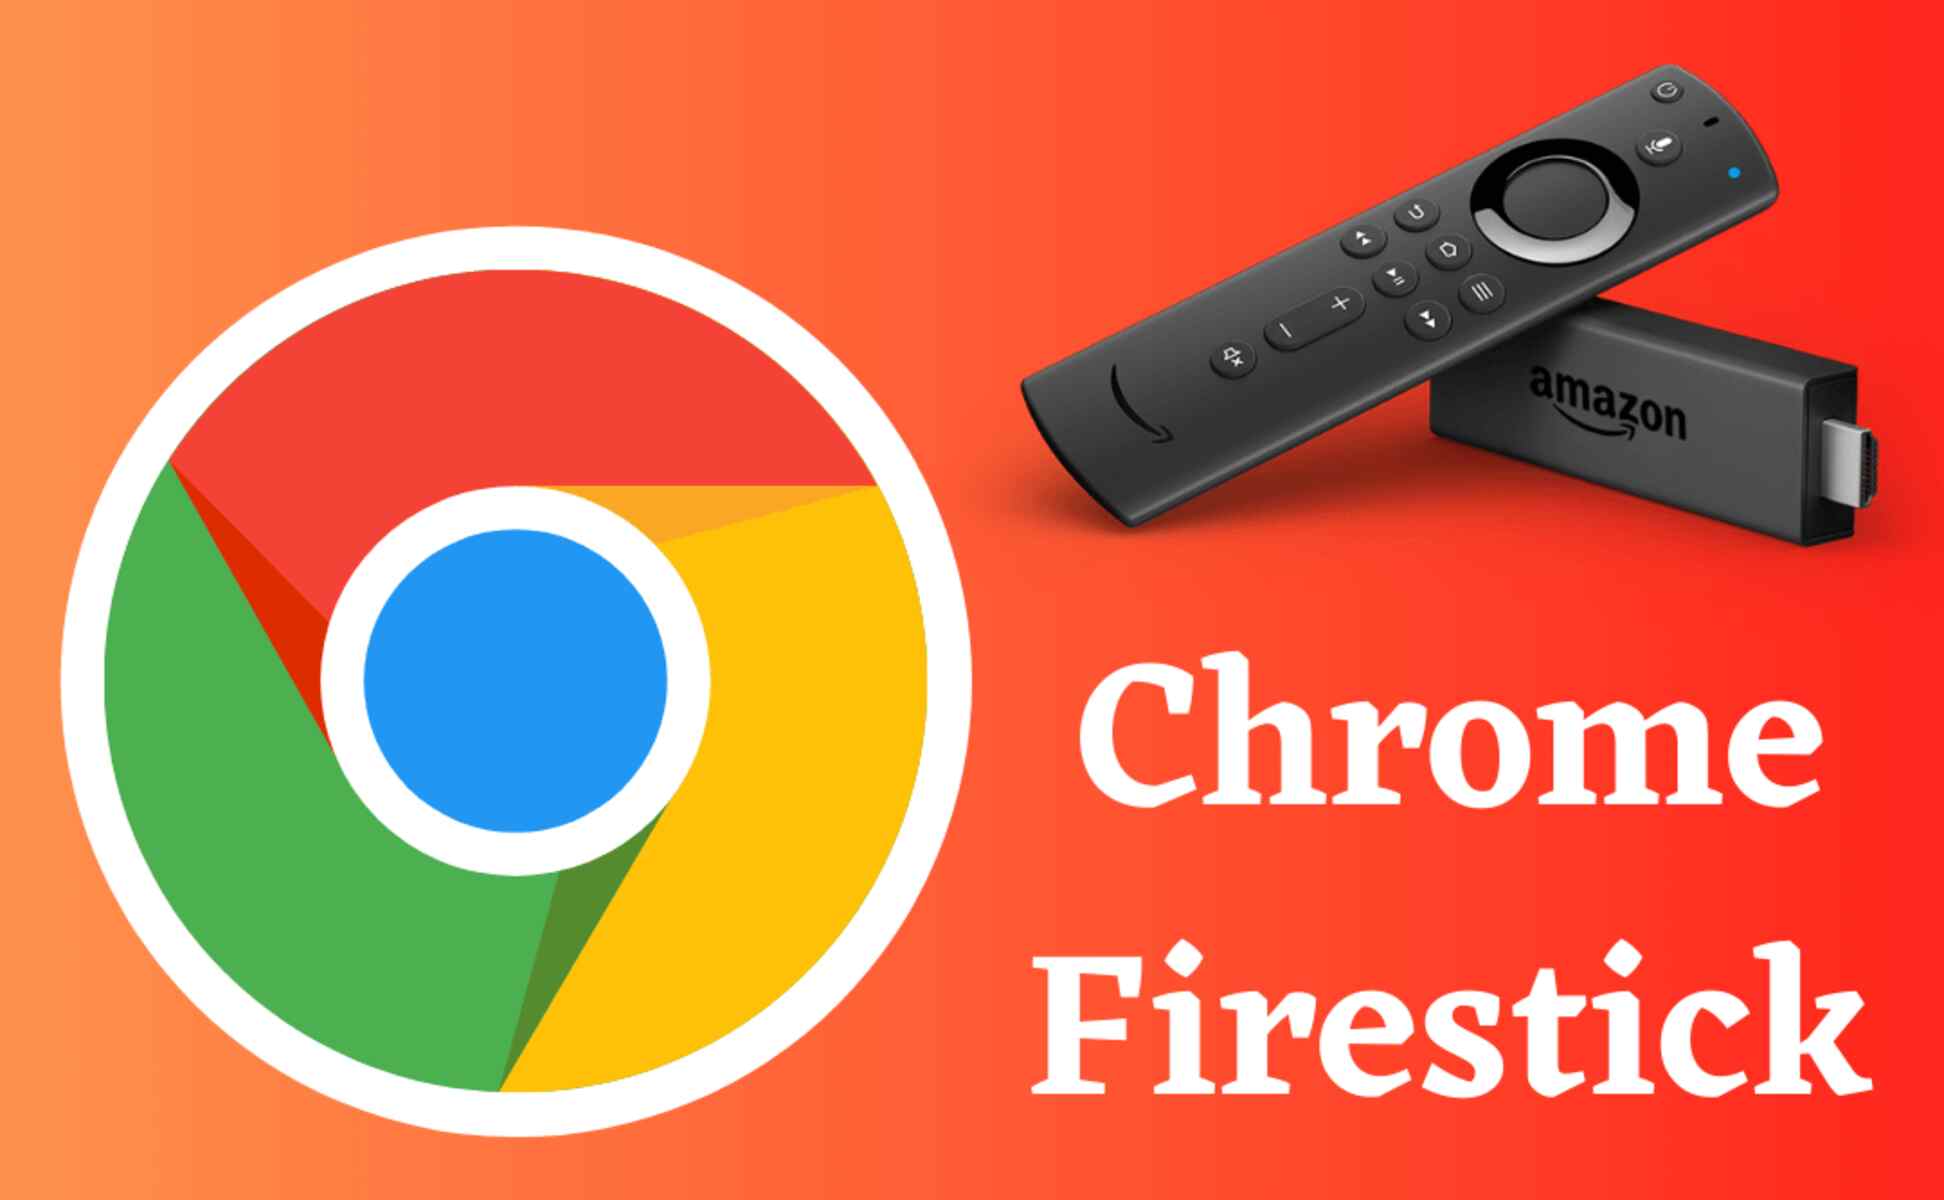 How To Install Google Chrome On Firestick